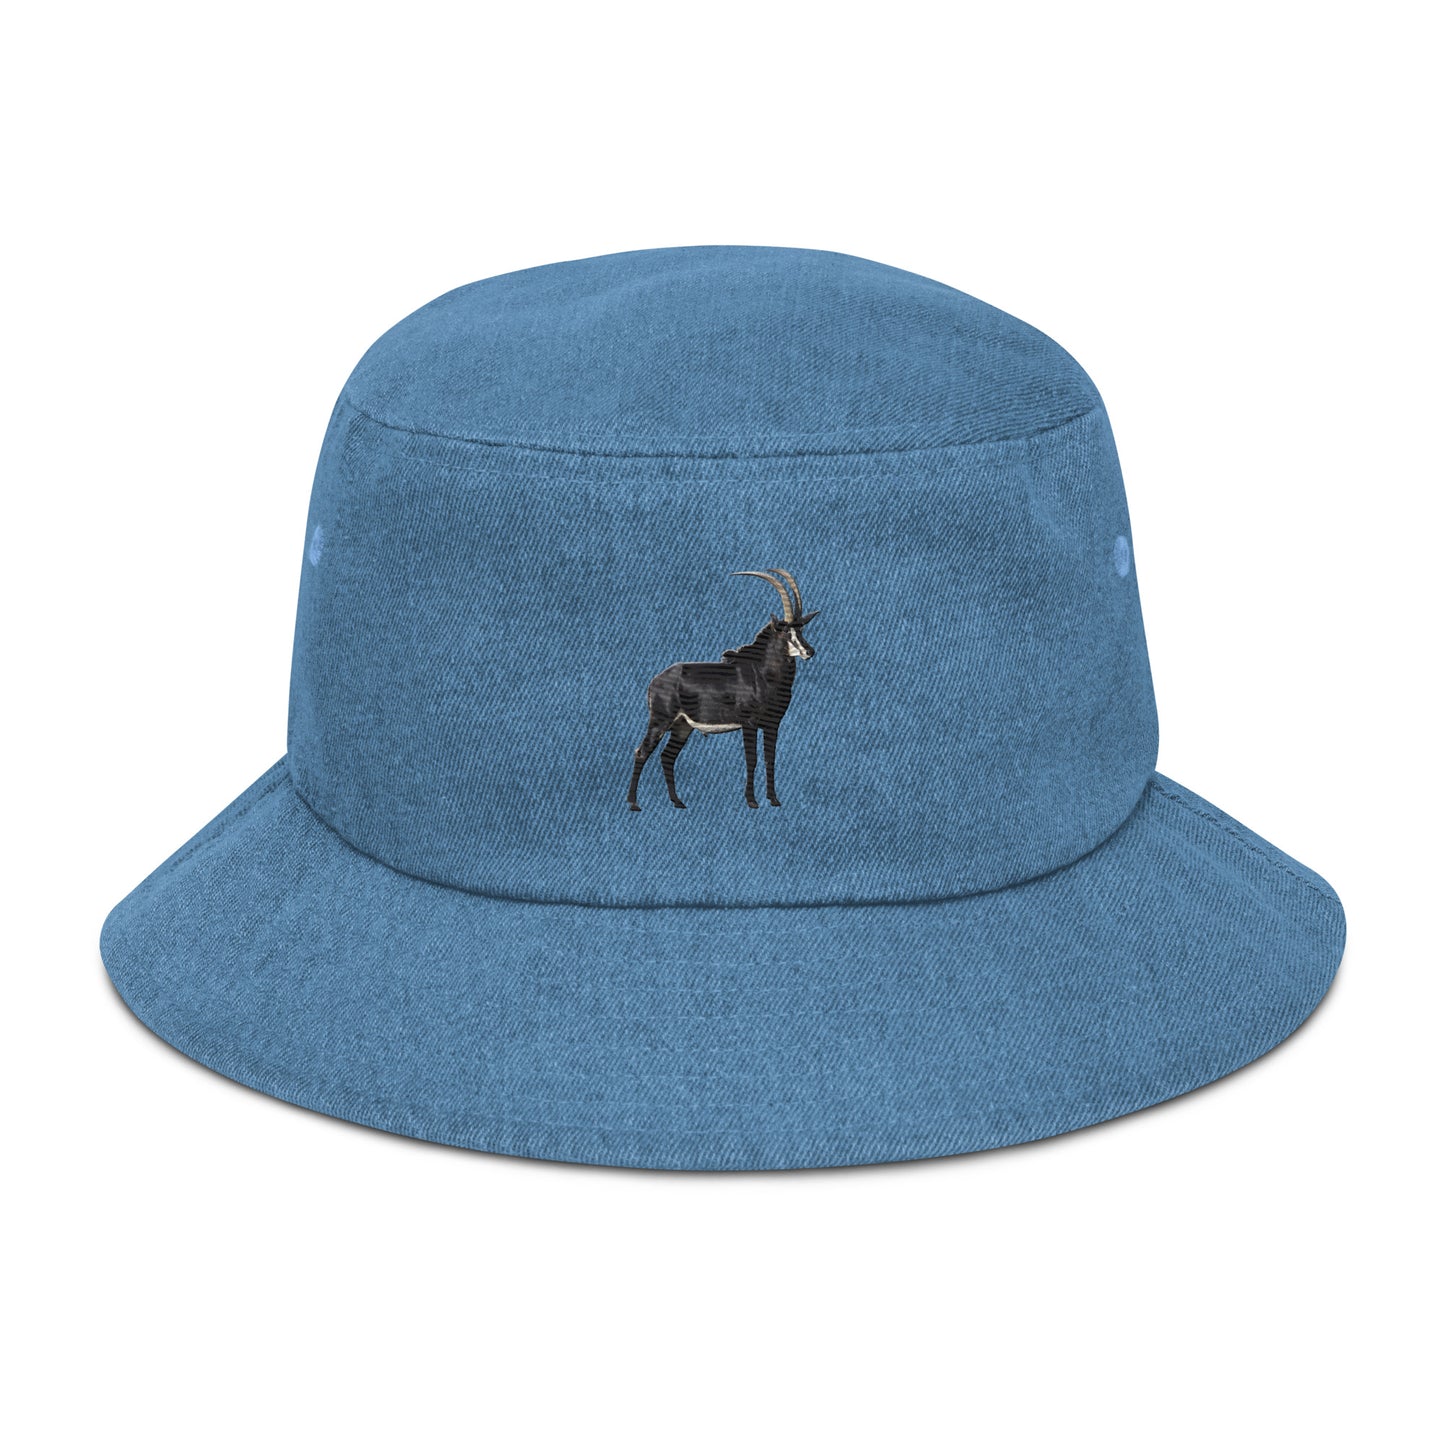 Denim bucket hat embroidered with a Sable Antelope.